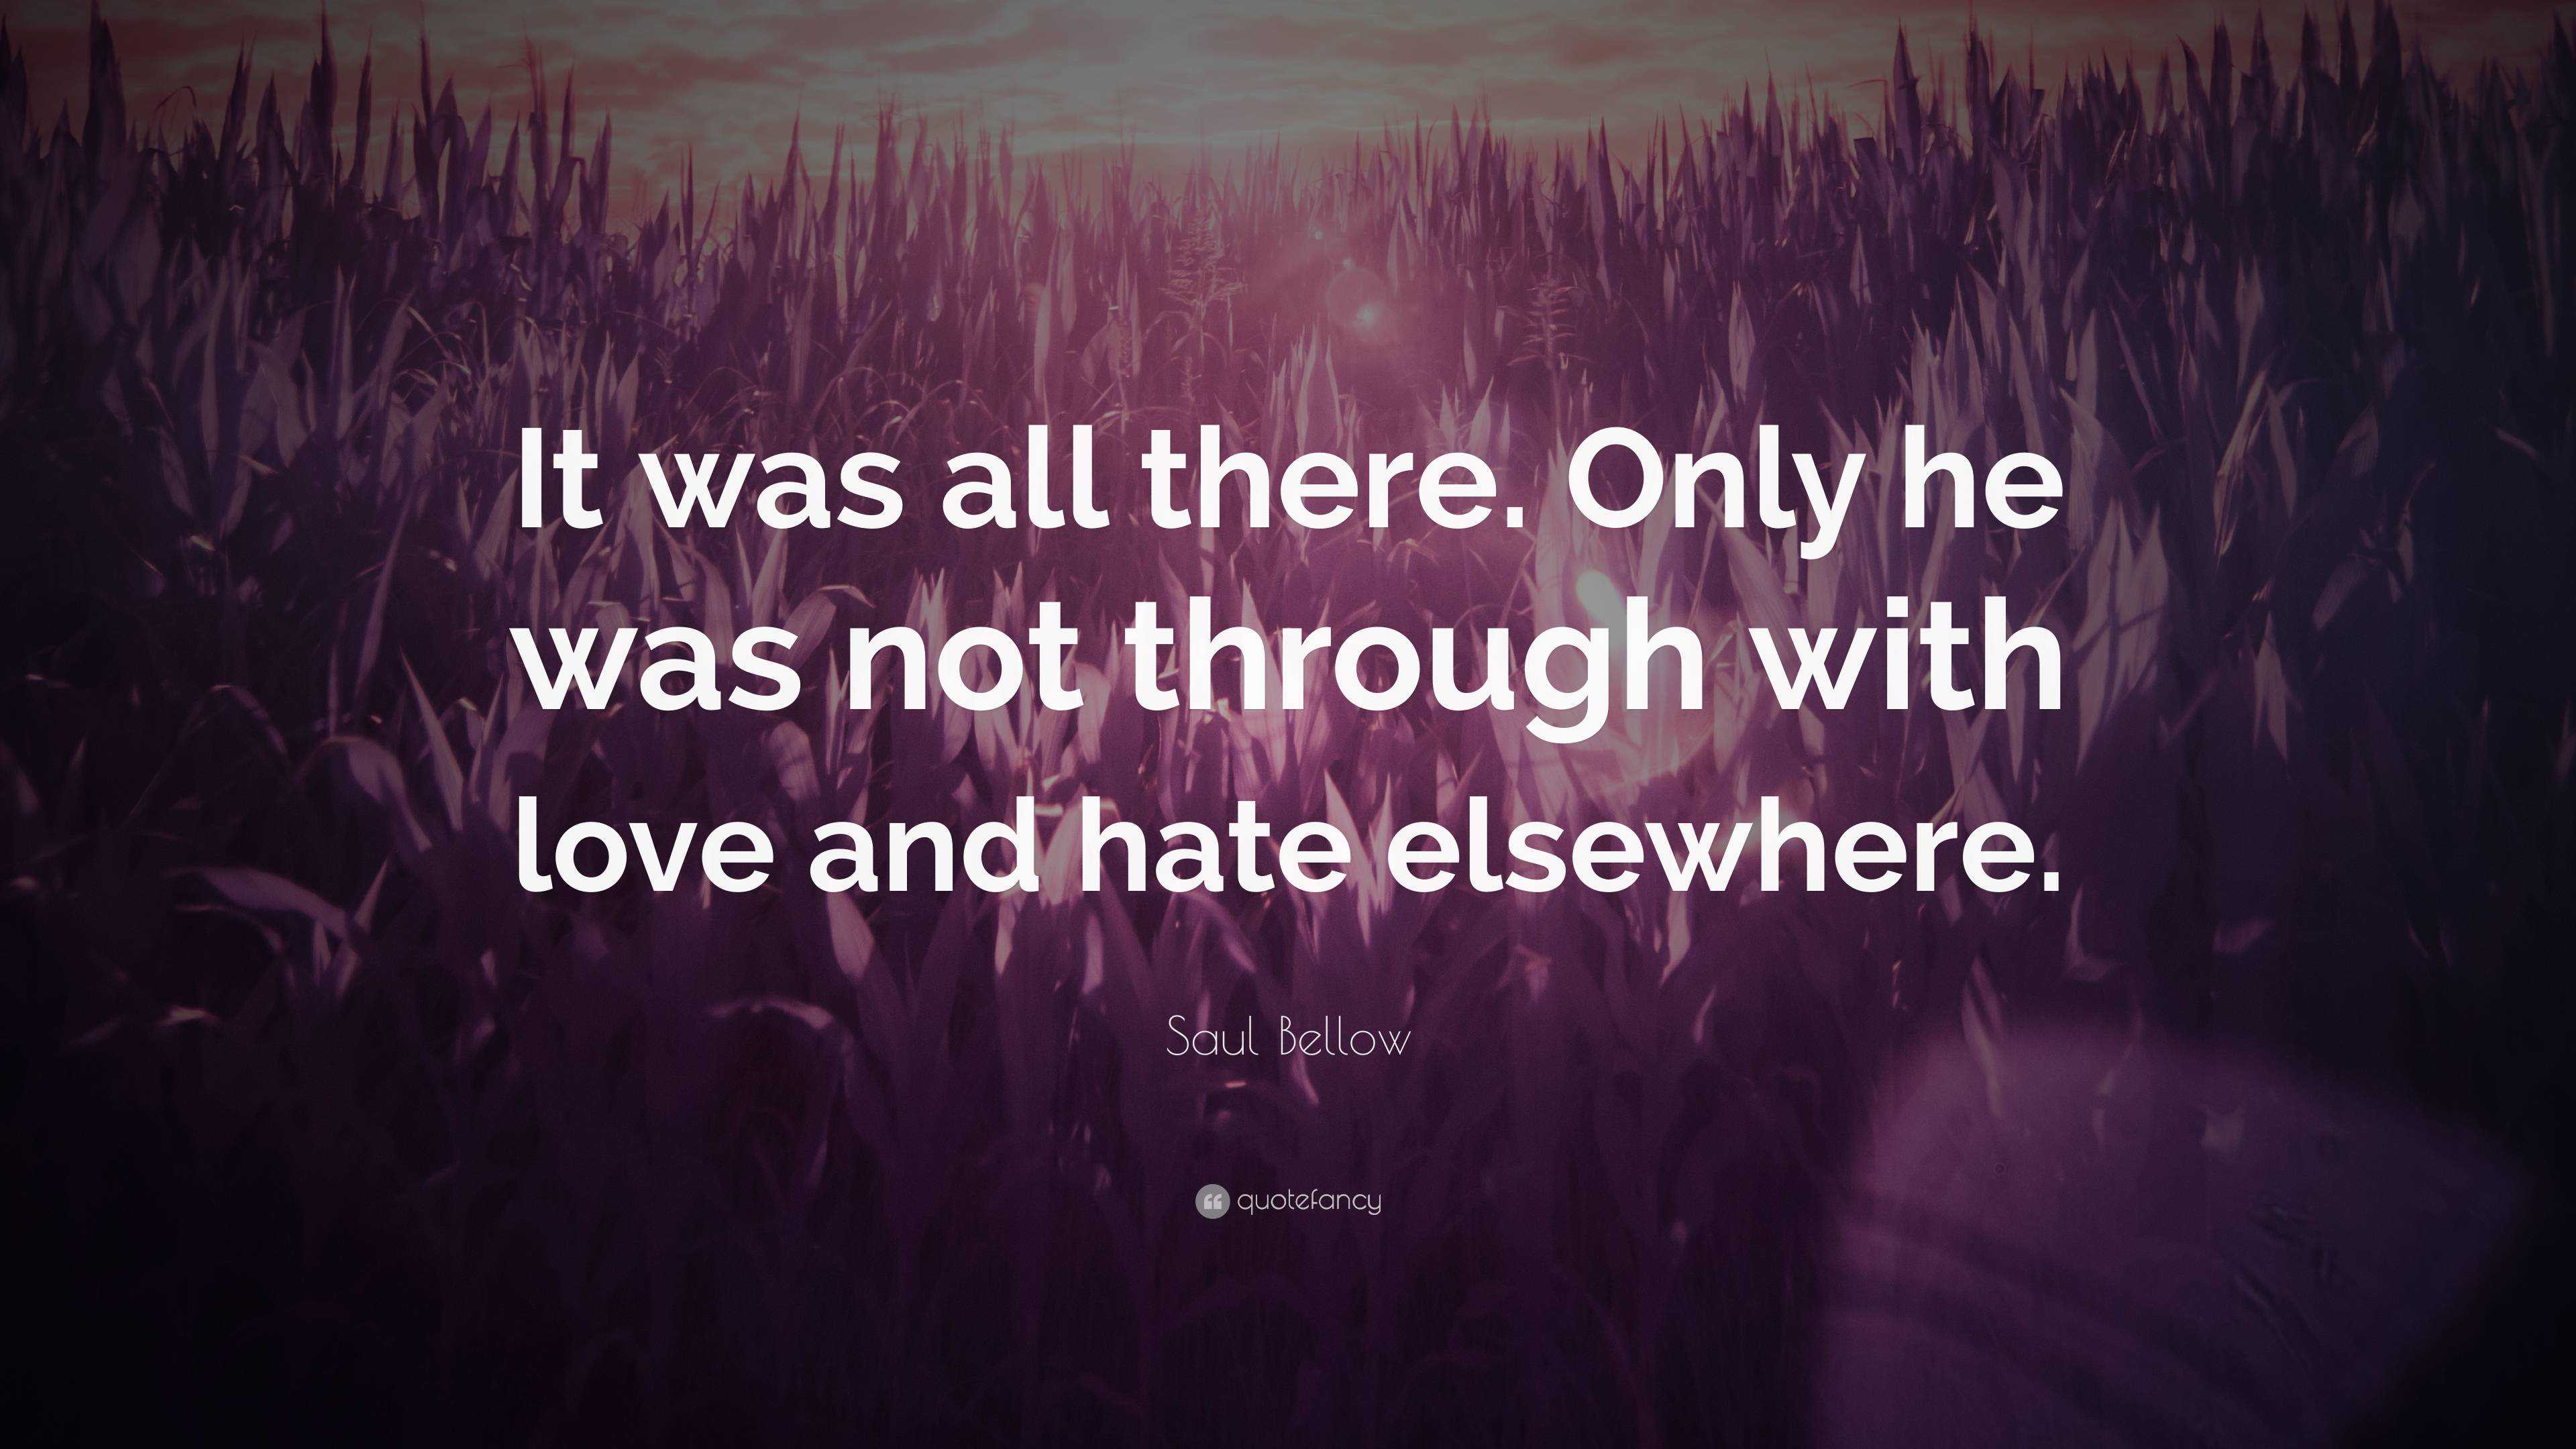 Saul Bellow Quote: “It was all there. Only he was not through with love ...